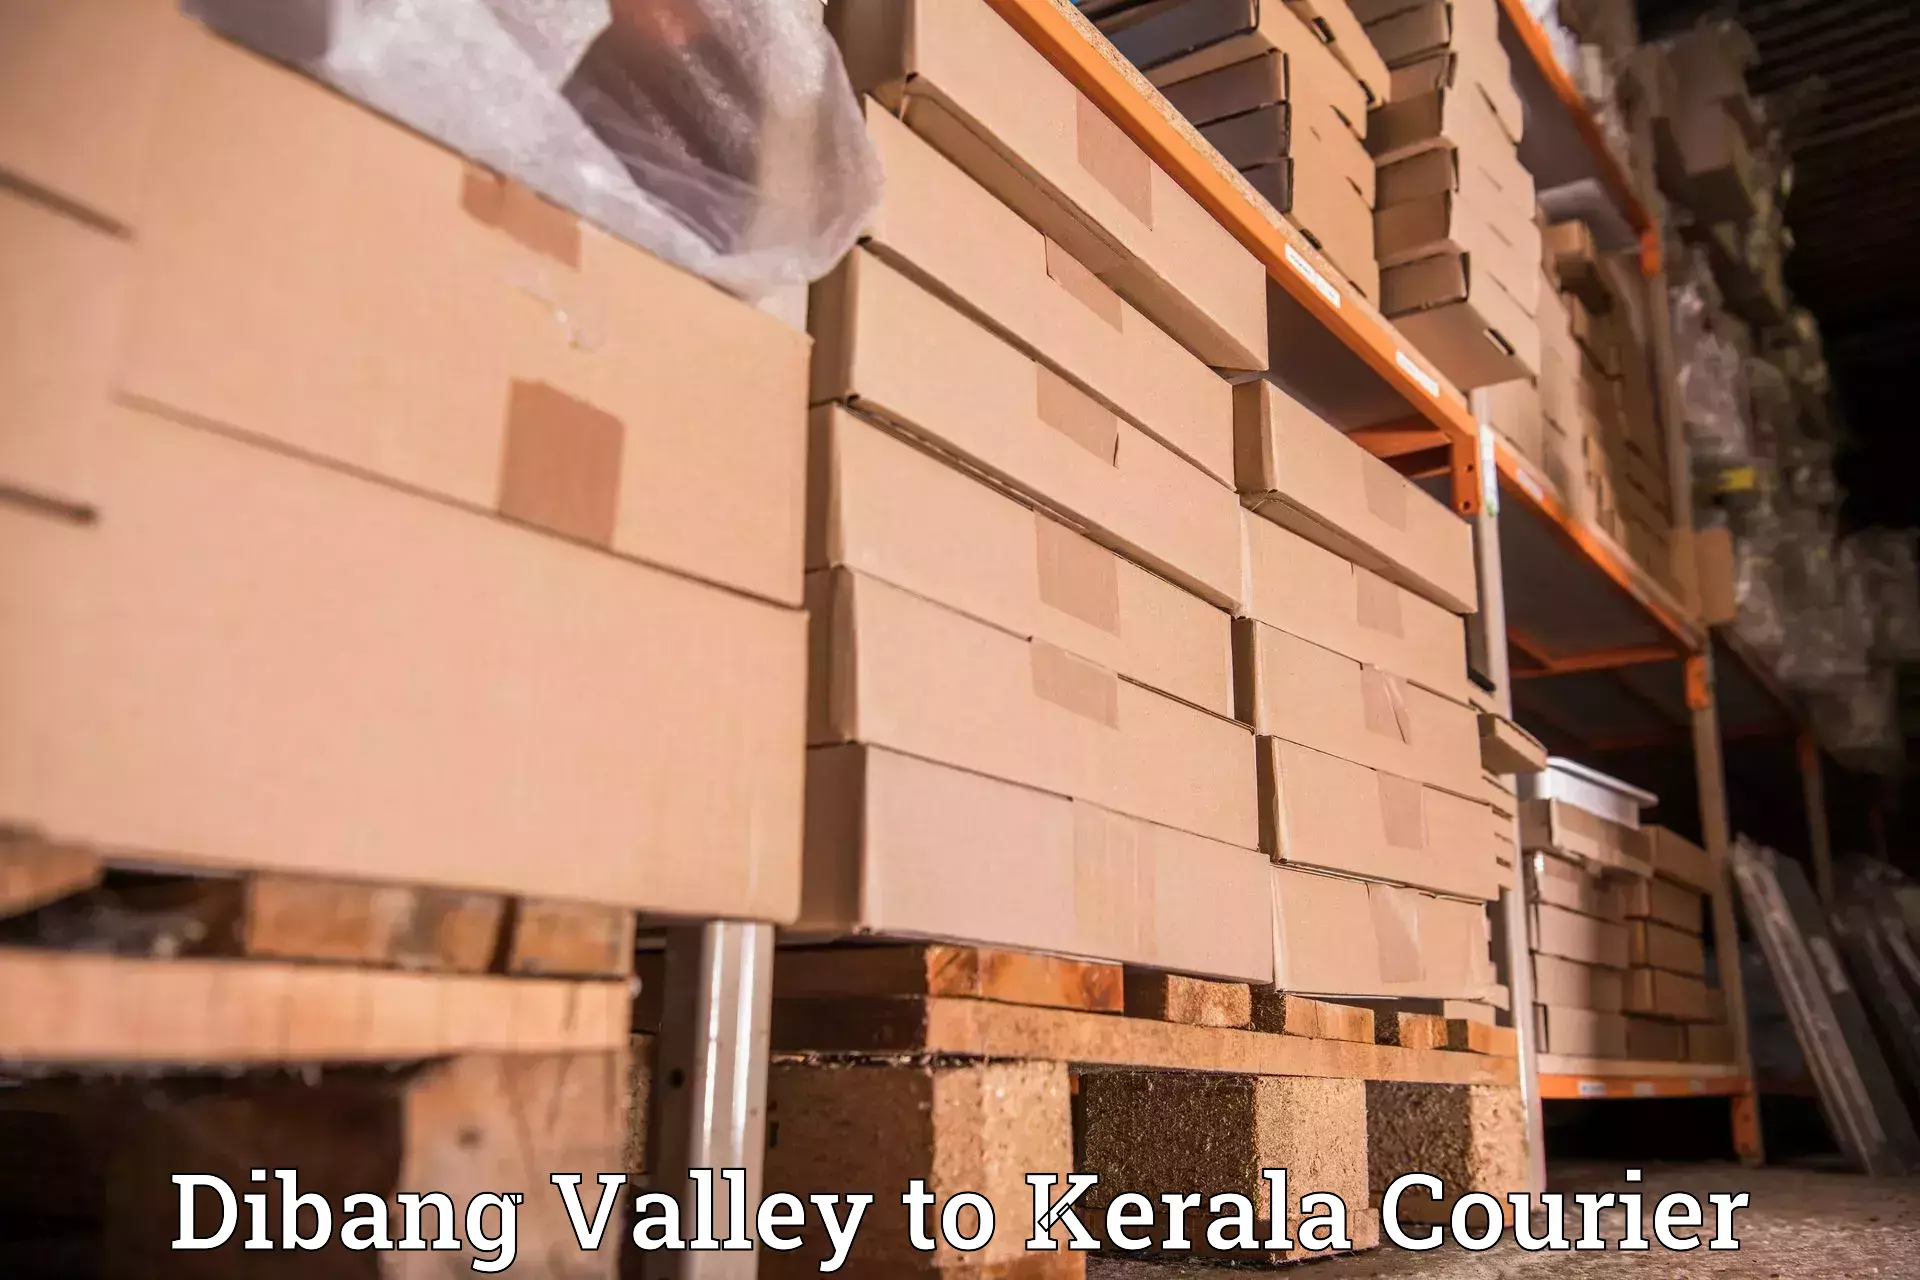 Courier service partnerships Dibang Valley to Ramankary